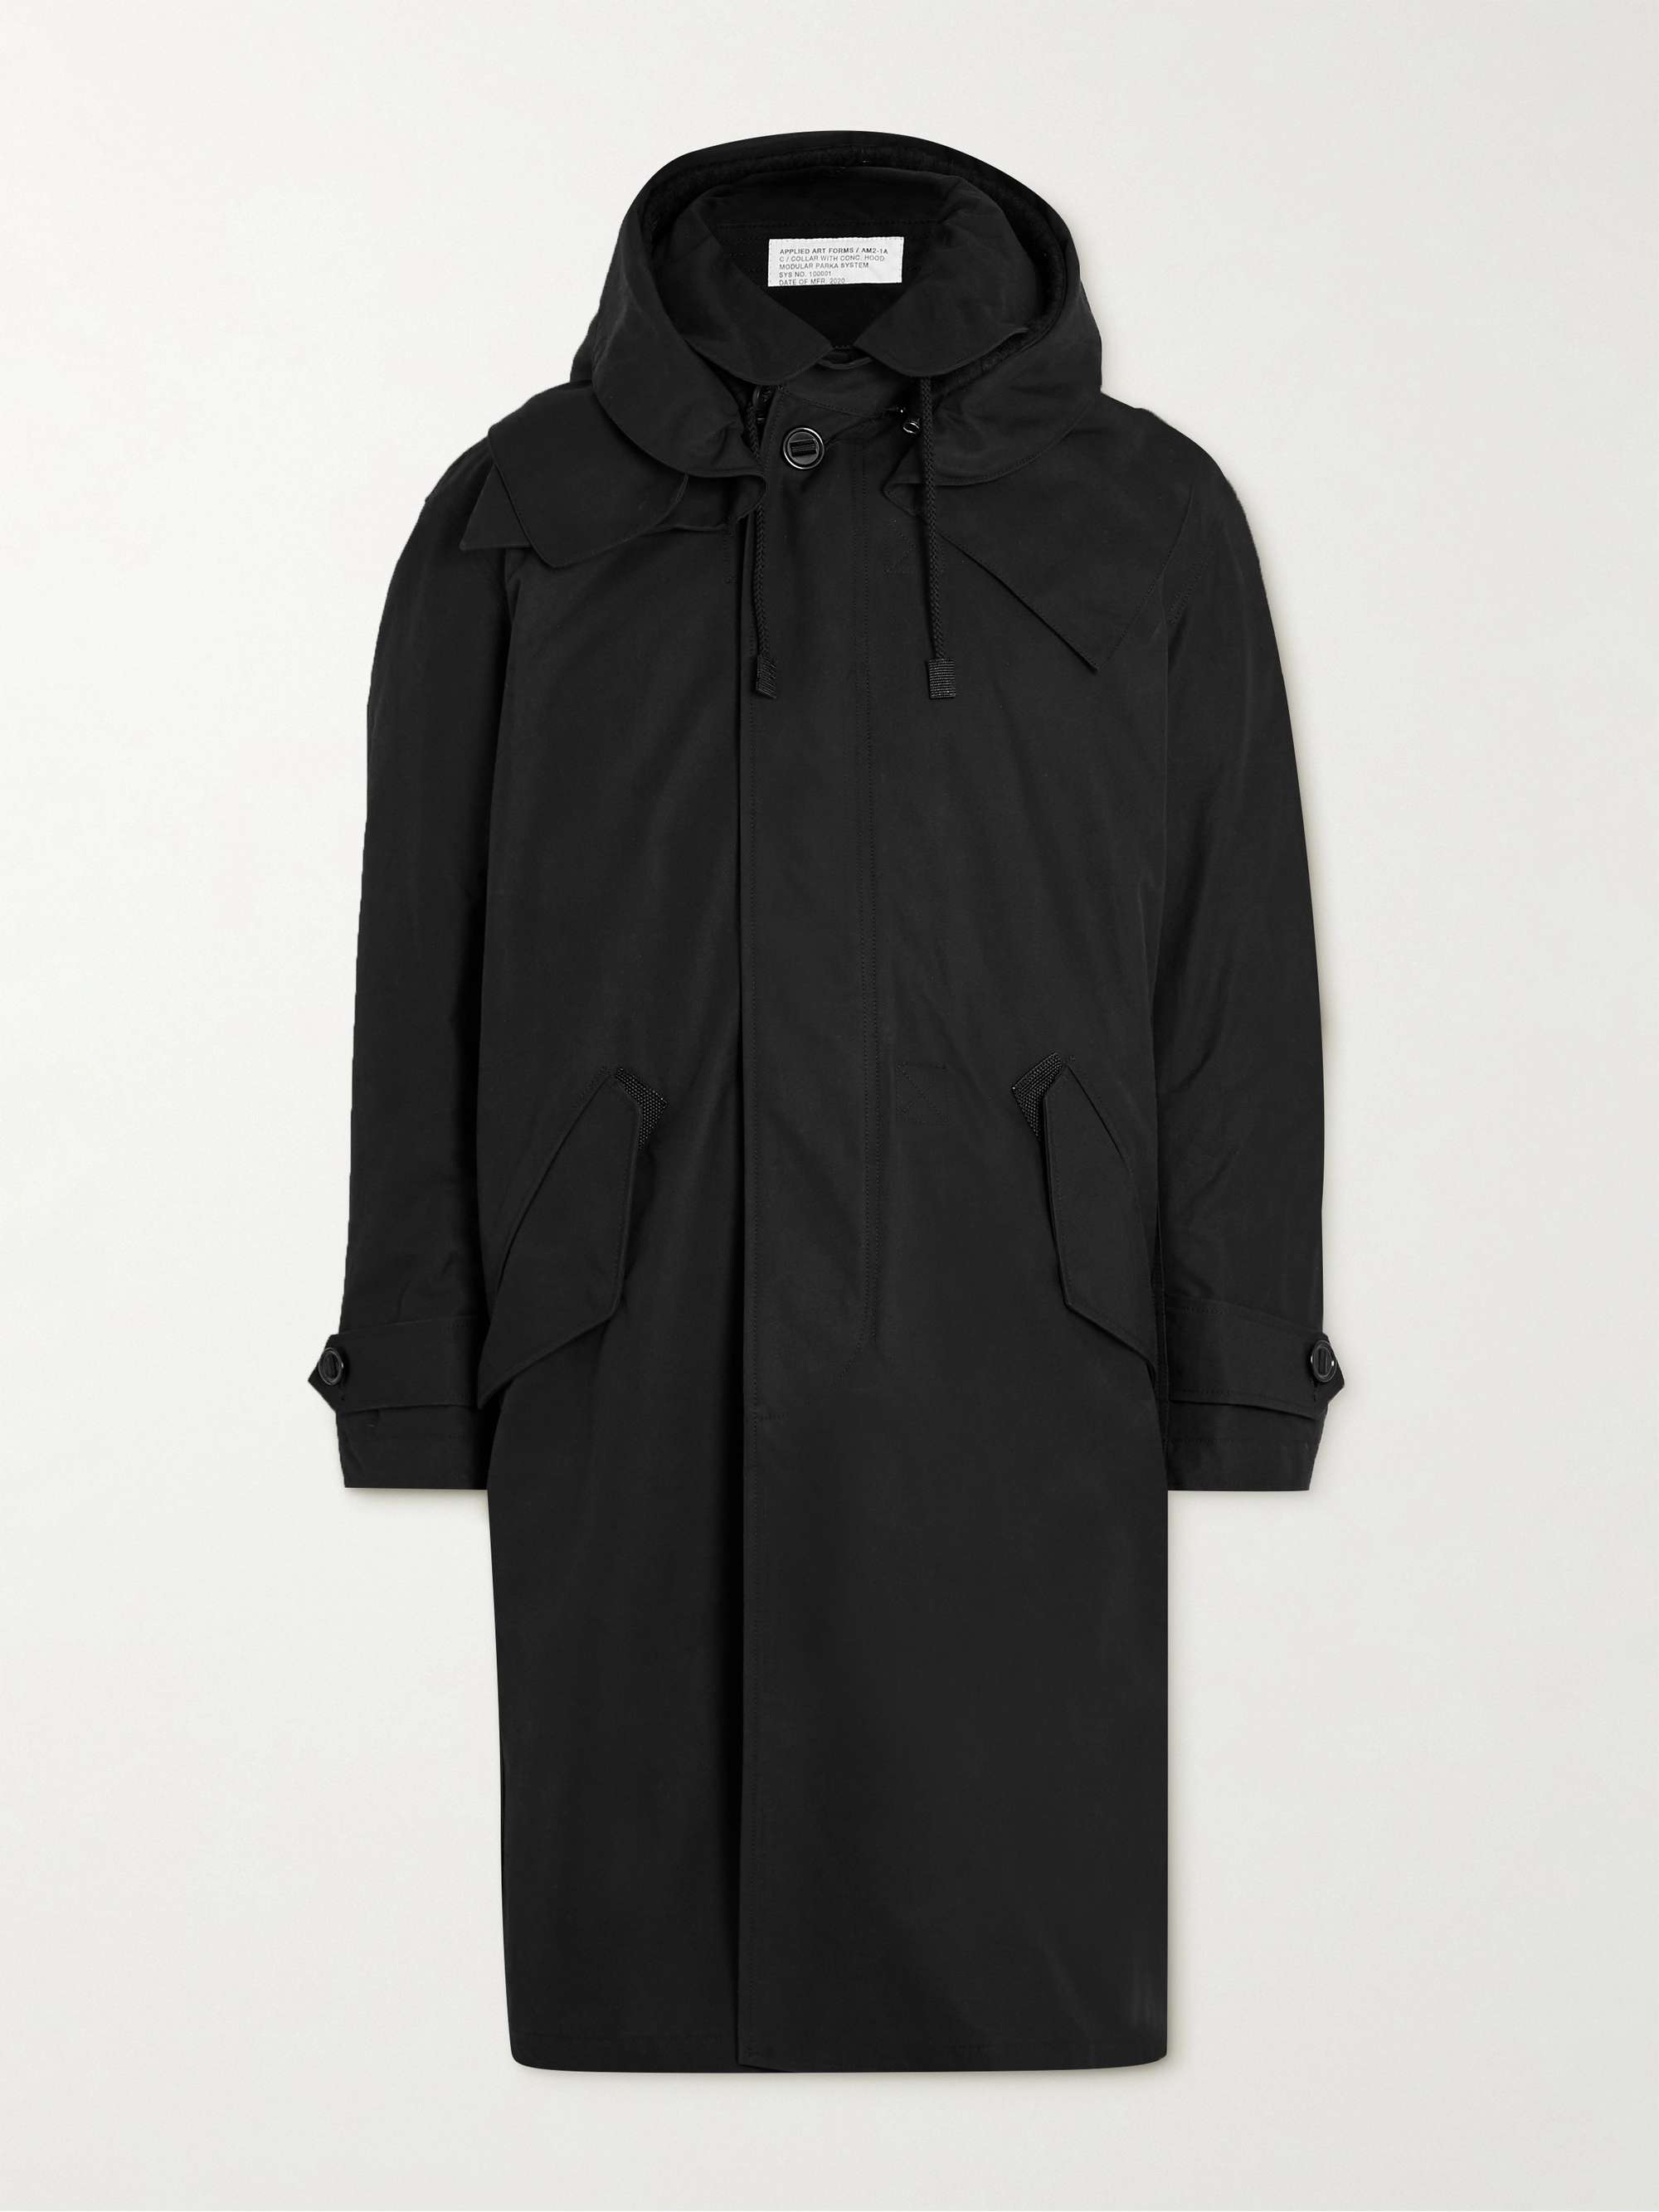 APPLIED ART FORMS AM2-1 Convertible Padded Cotton-Ventile Hooded Parka with  Detachable Liner | MR PORTER